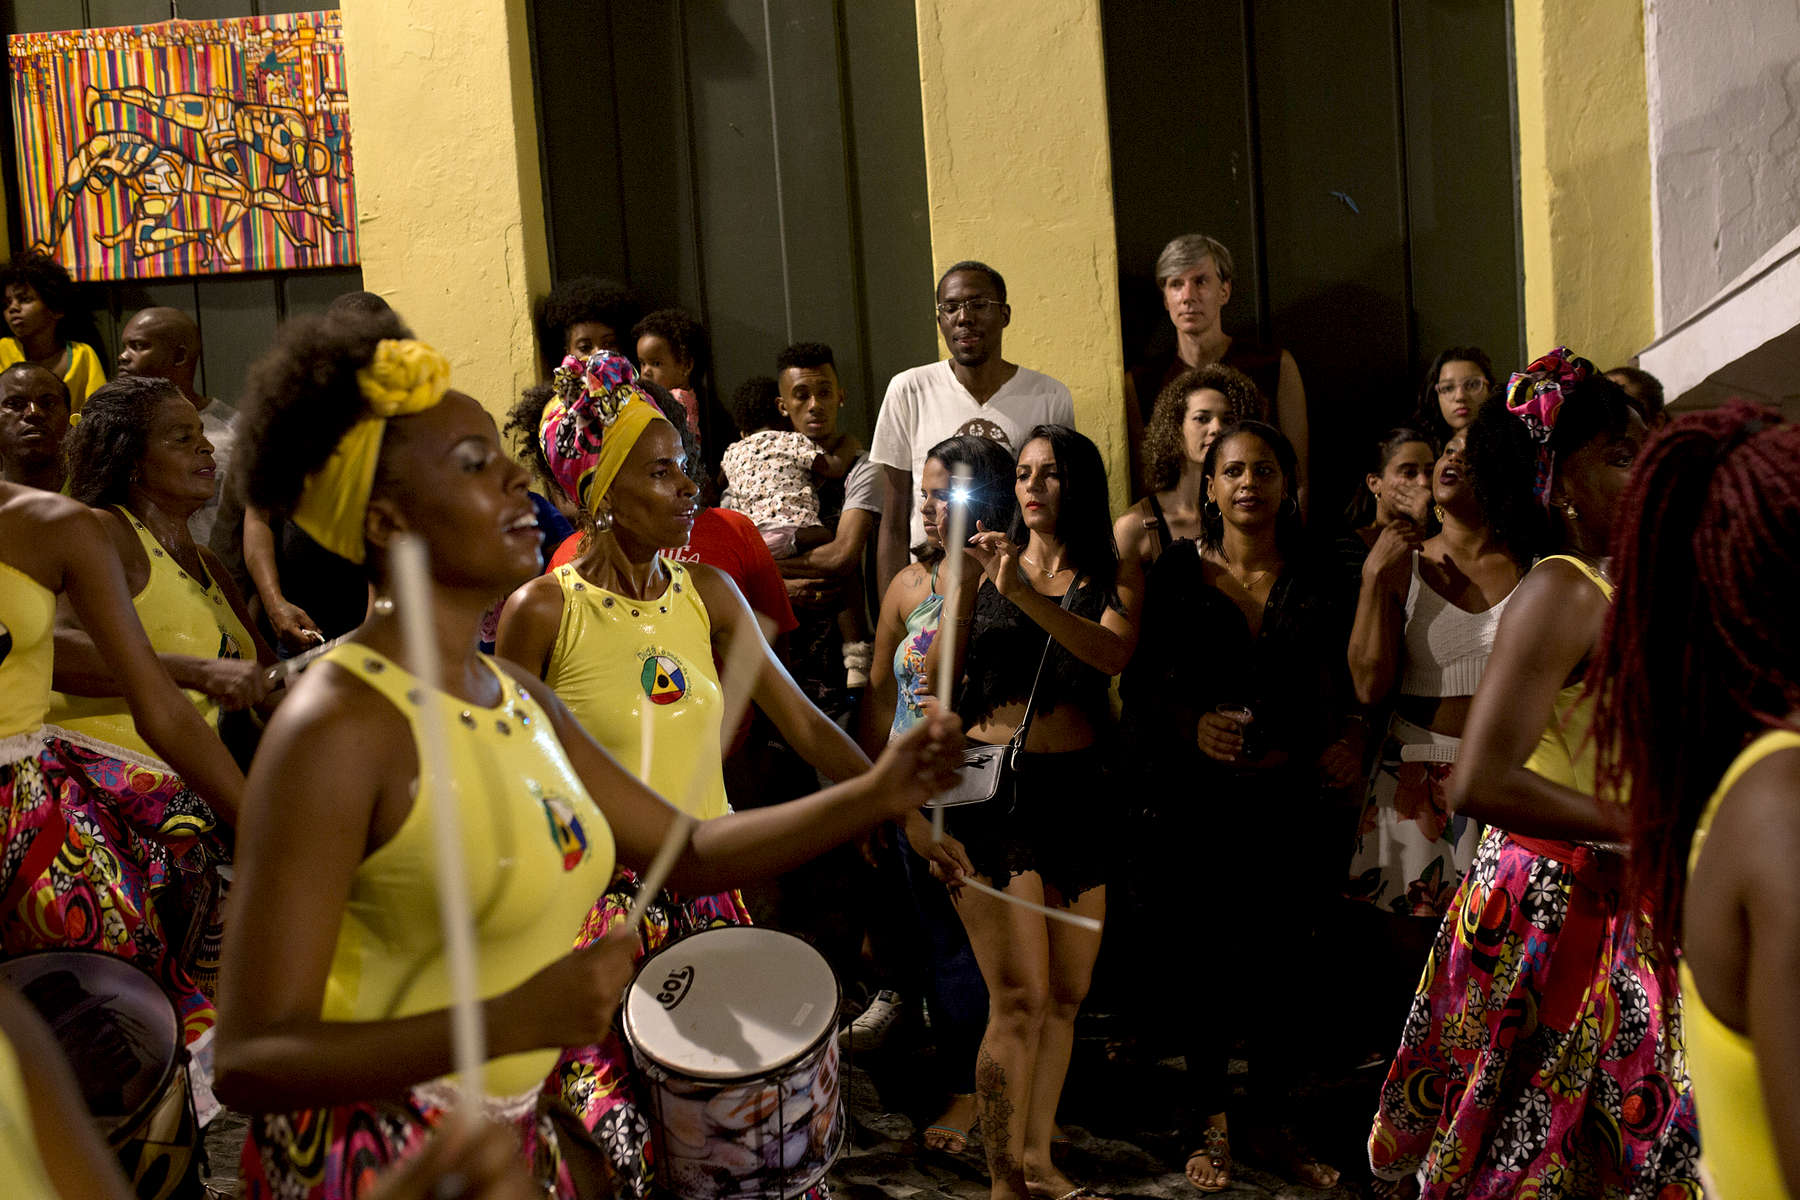 A group of onlookers watch a Didá performance on the street outside Project Didá in Salvador's historic neighborhood, Pelourinho.